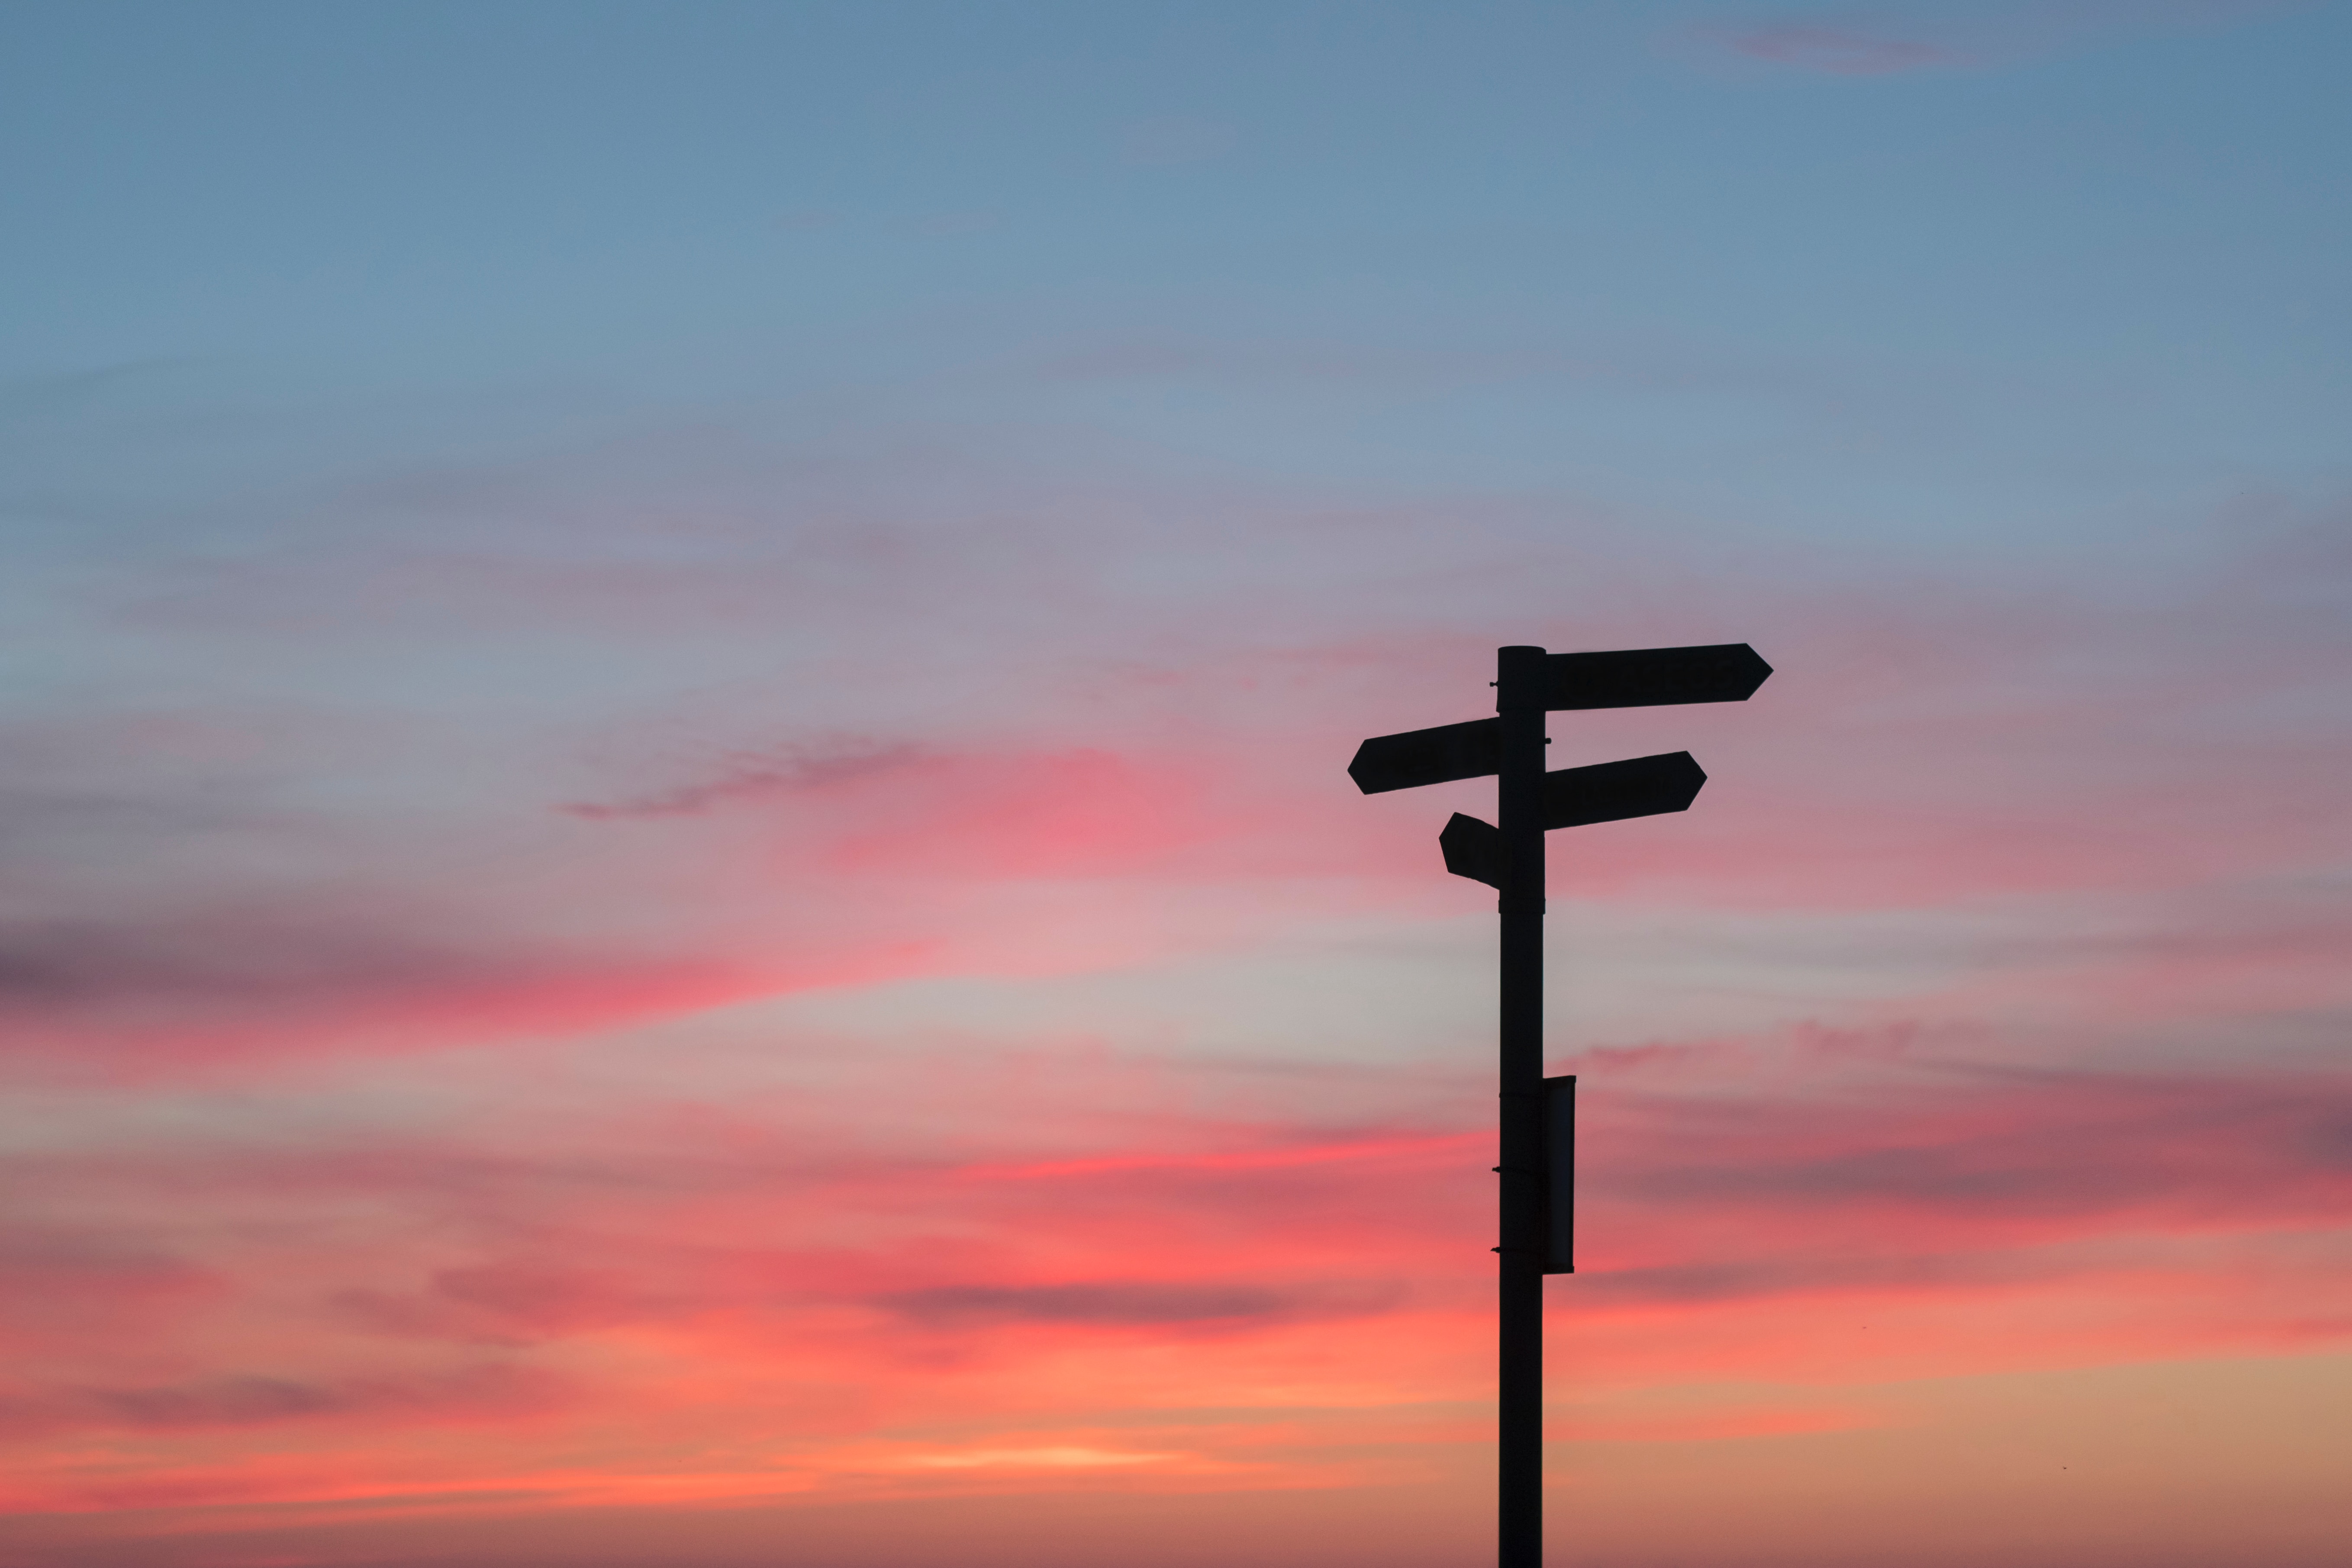 A signpost pointing in four different directions. It is in silhouette against a pink and grey sunset sky.